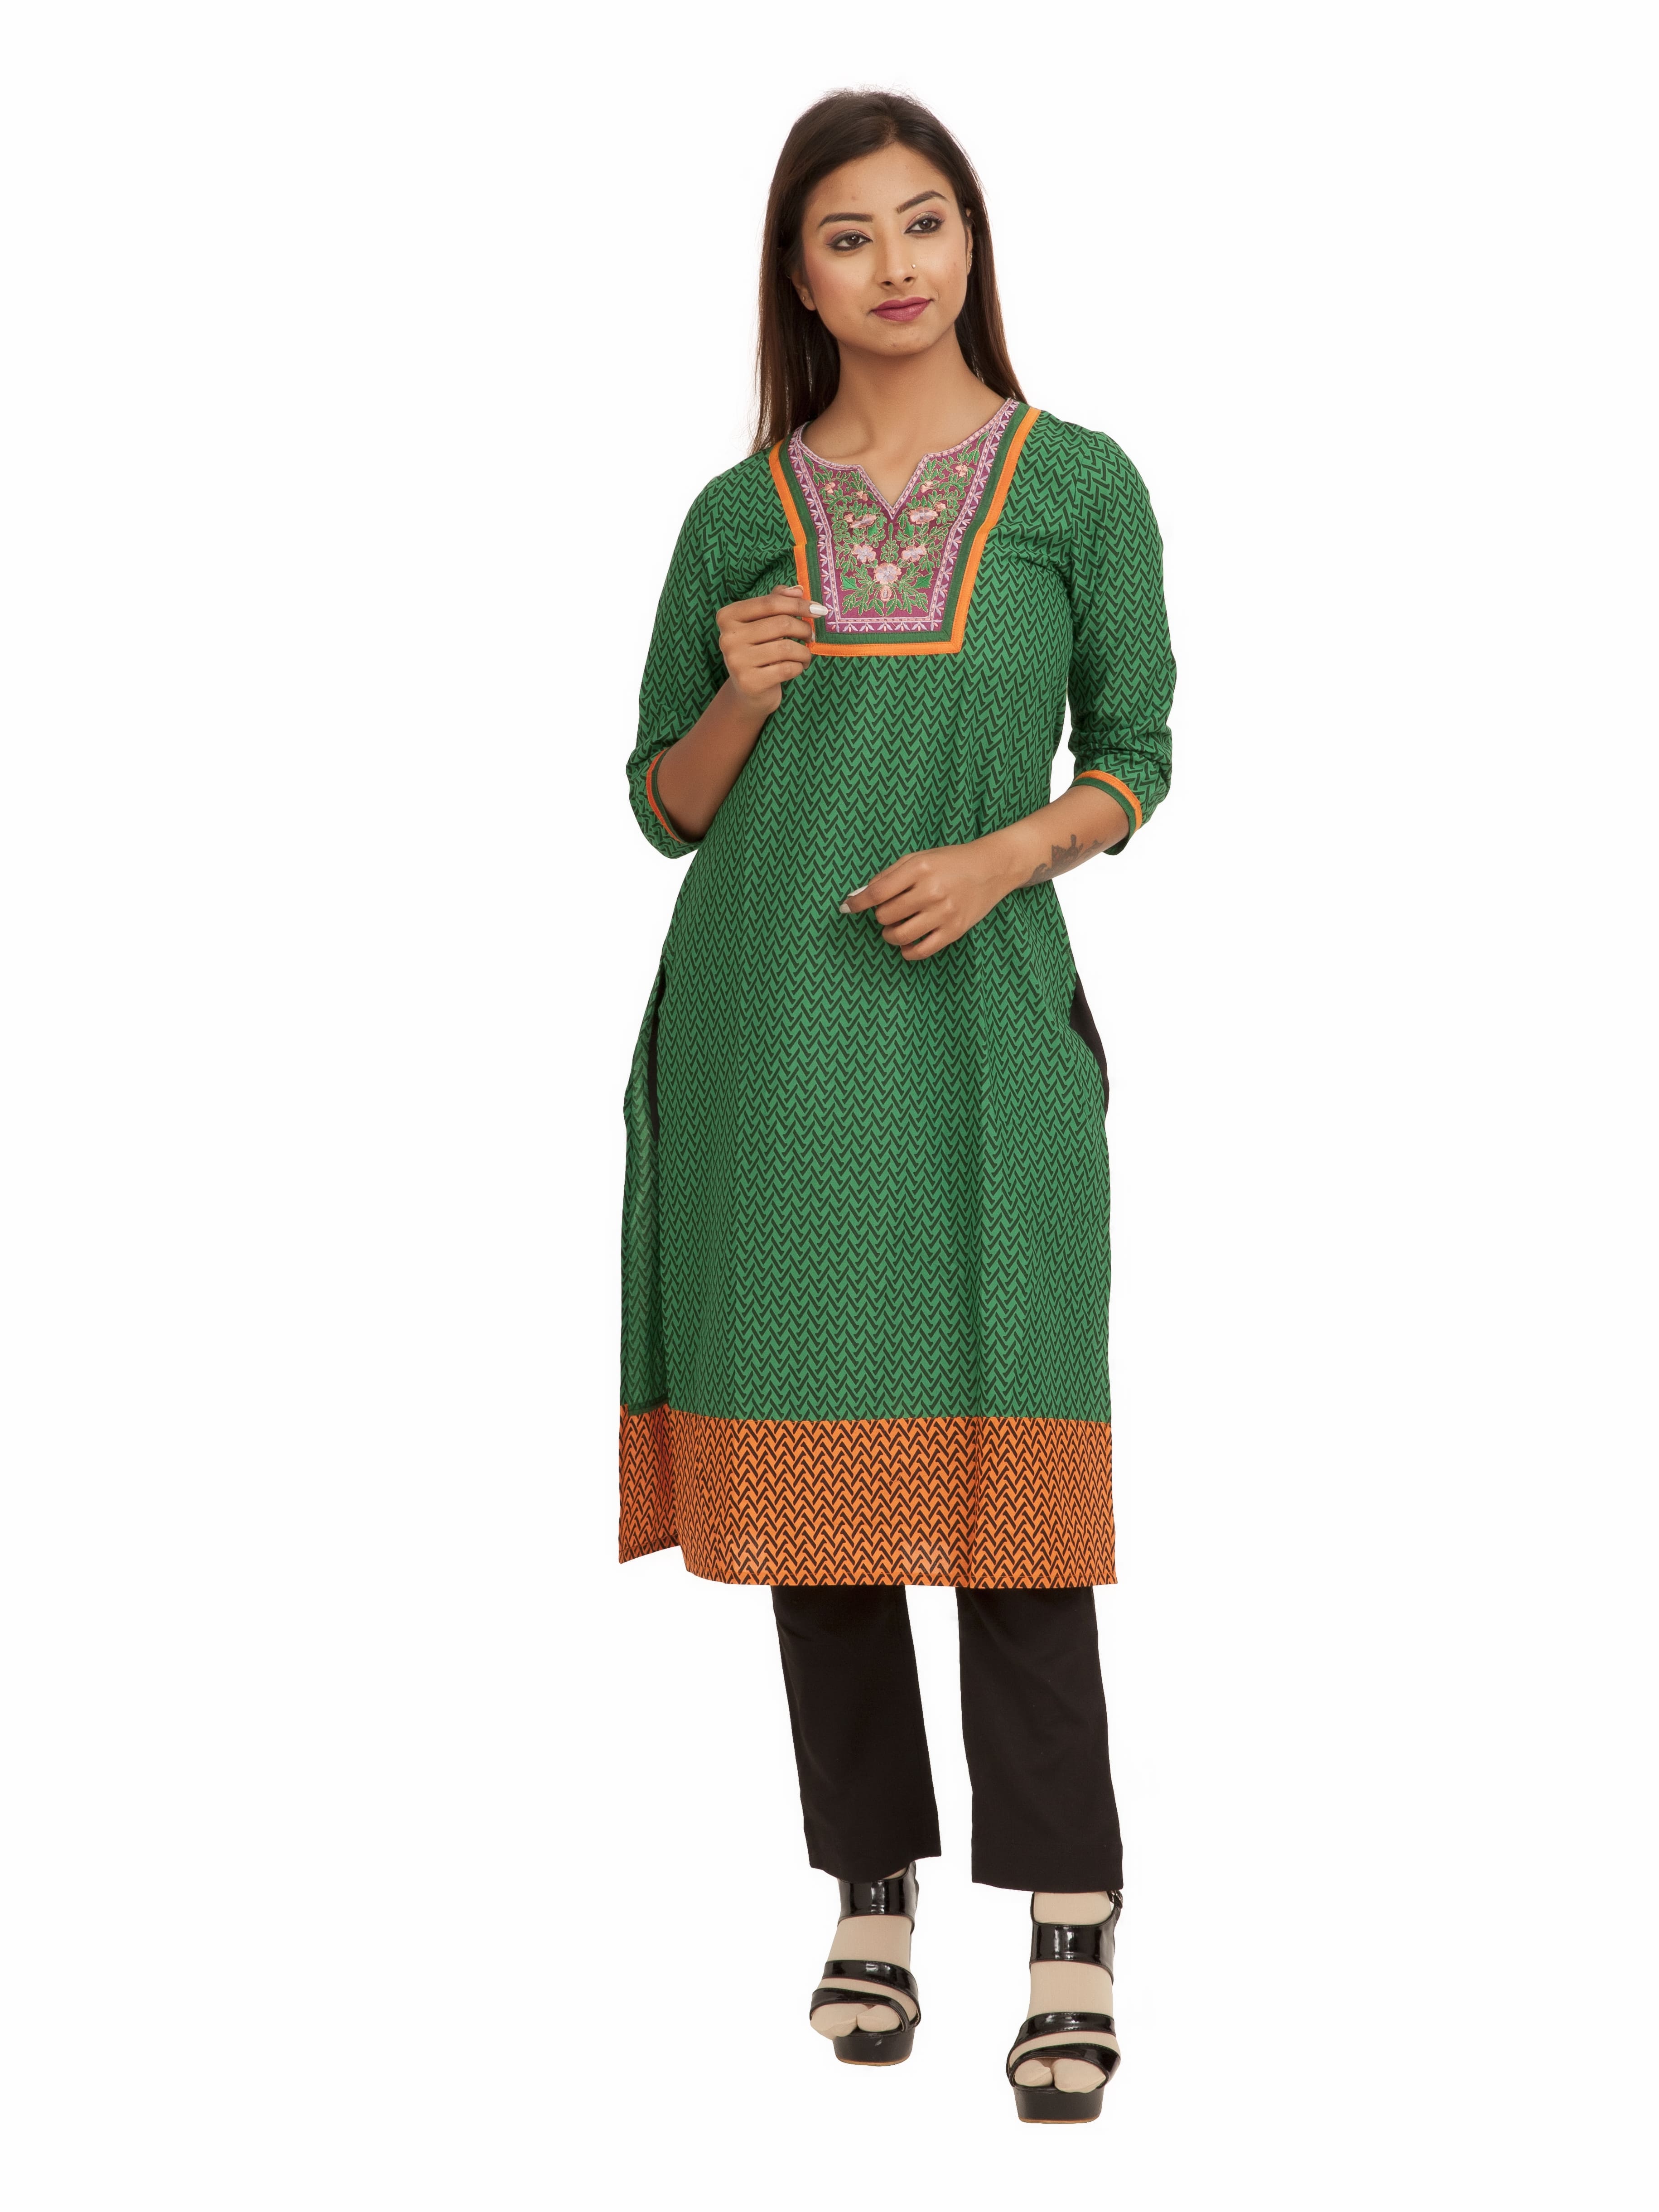 Wholesale Indian Clothing Suppliers in India